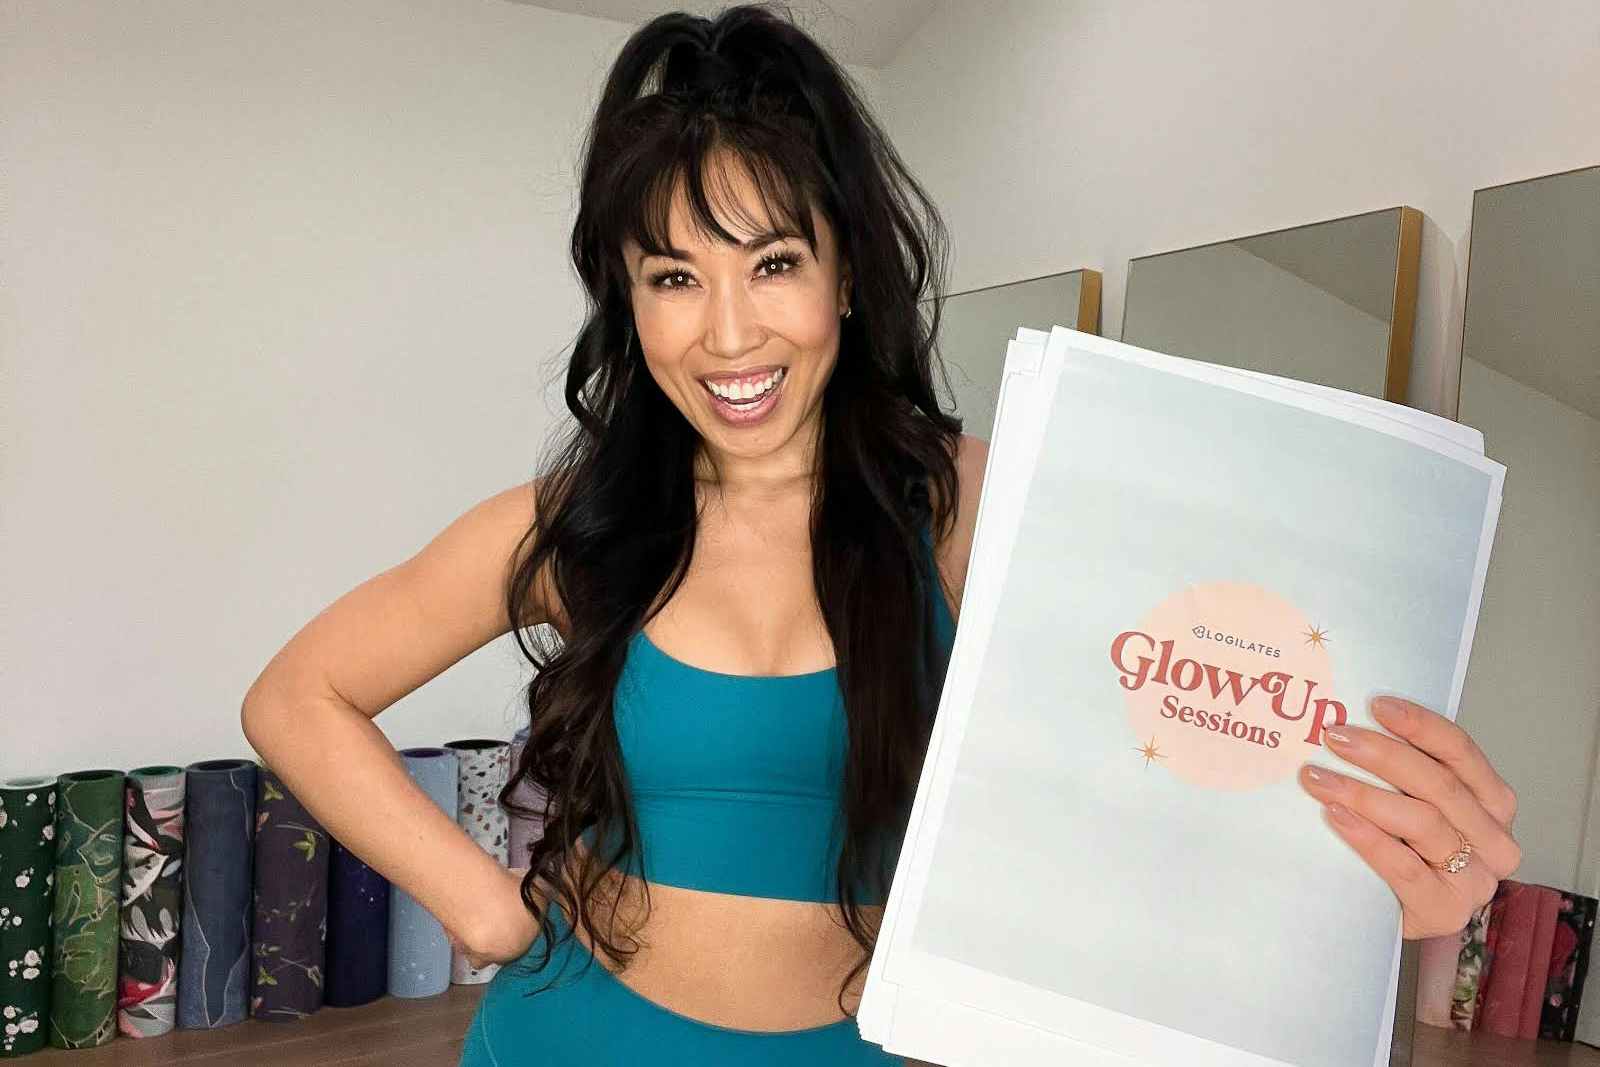 Cassey from the Blogiates Youtube channel holding up a Blogiates Glow Up plan